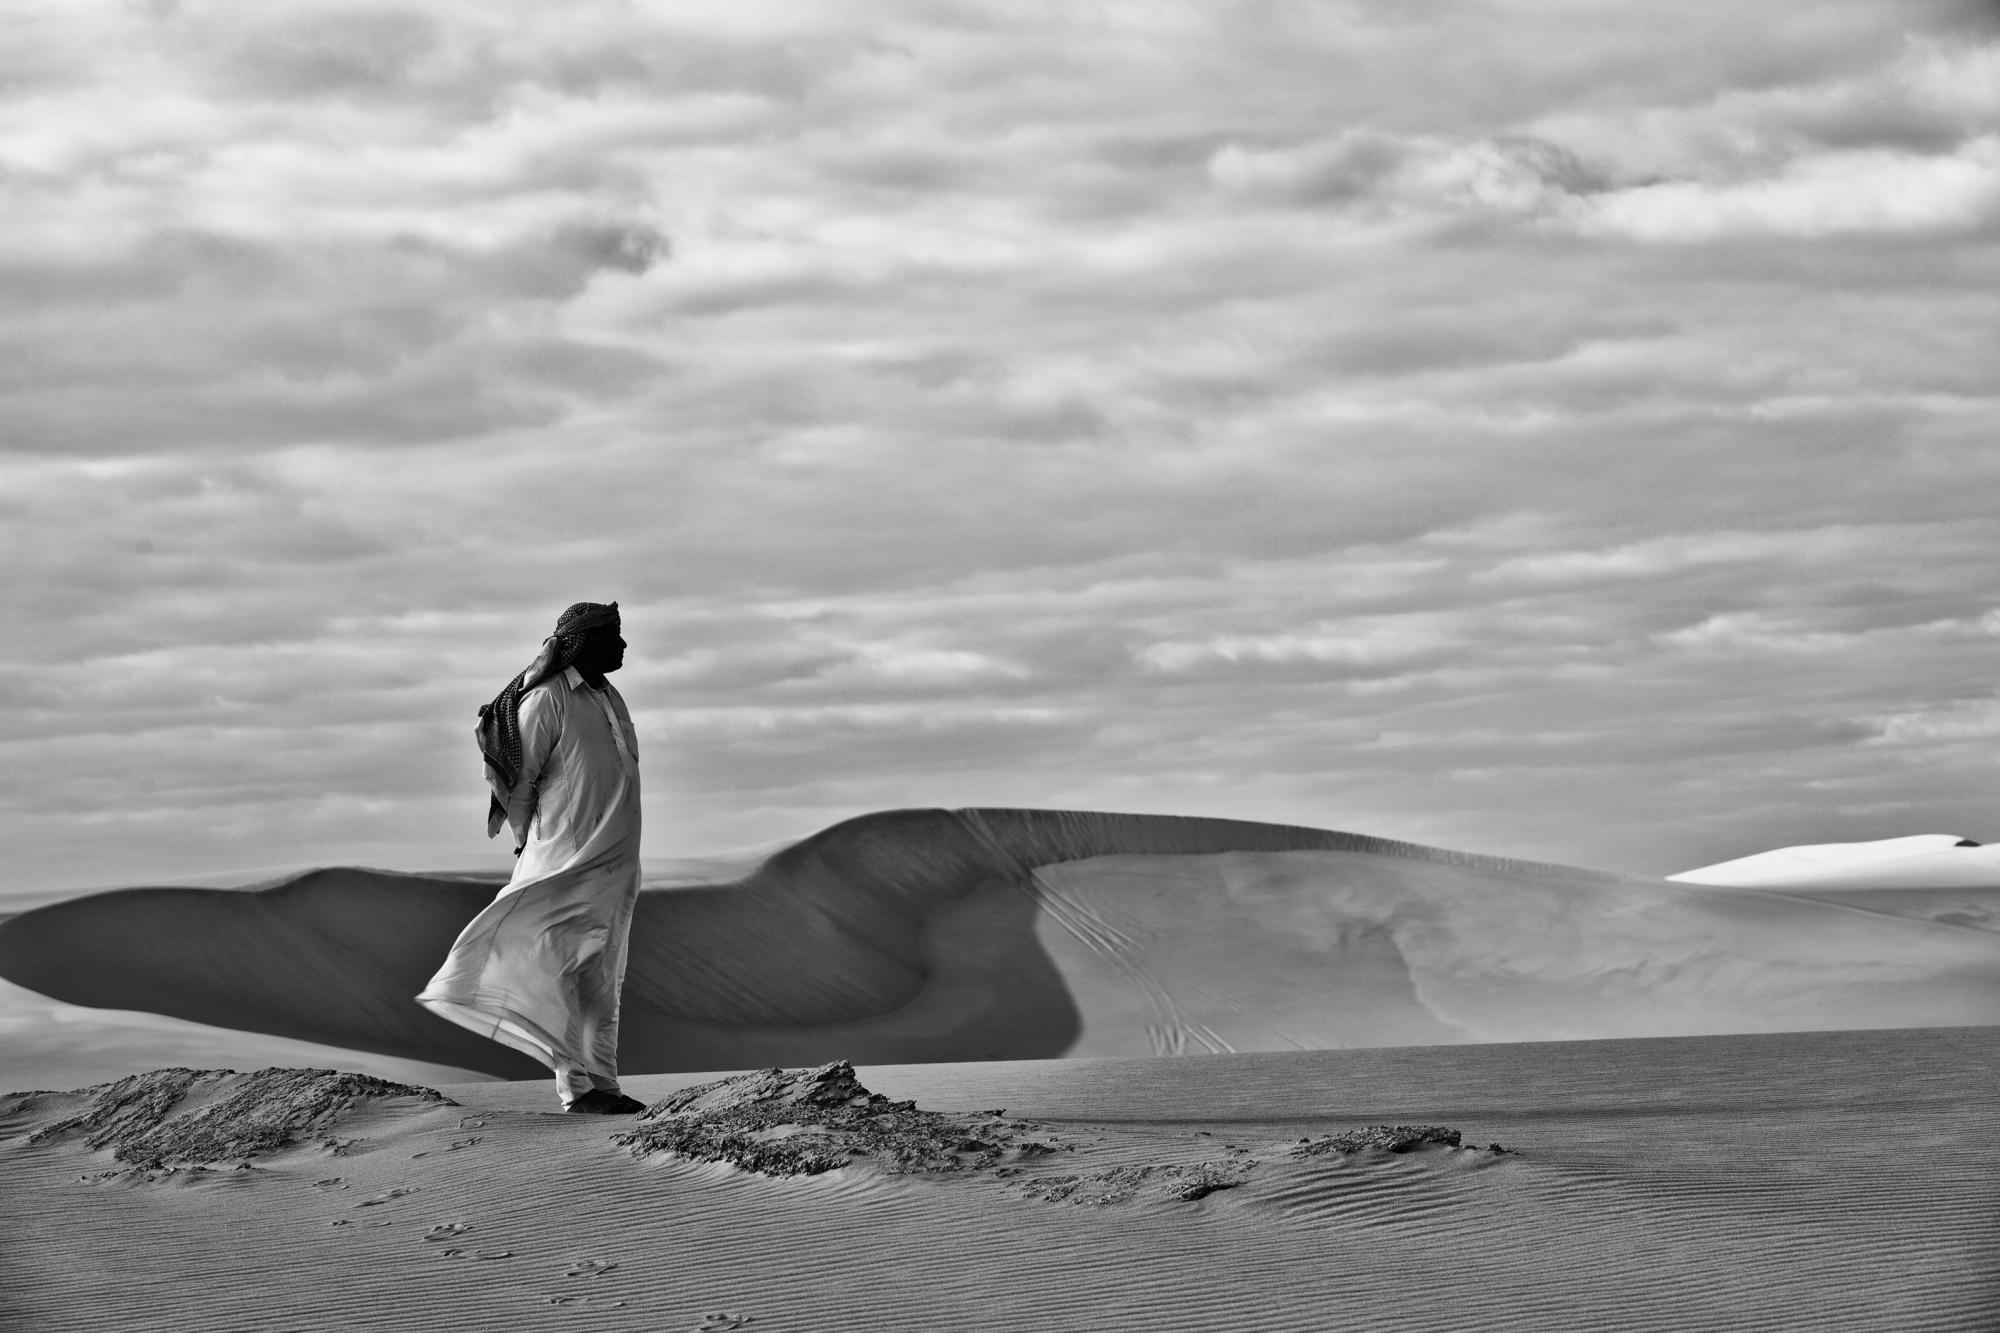 The Great Sand Sea, Siwa. Courtesy of the Photographic Gallery at the American University in Cairo